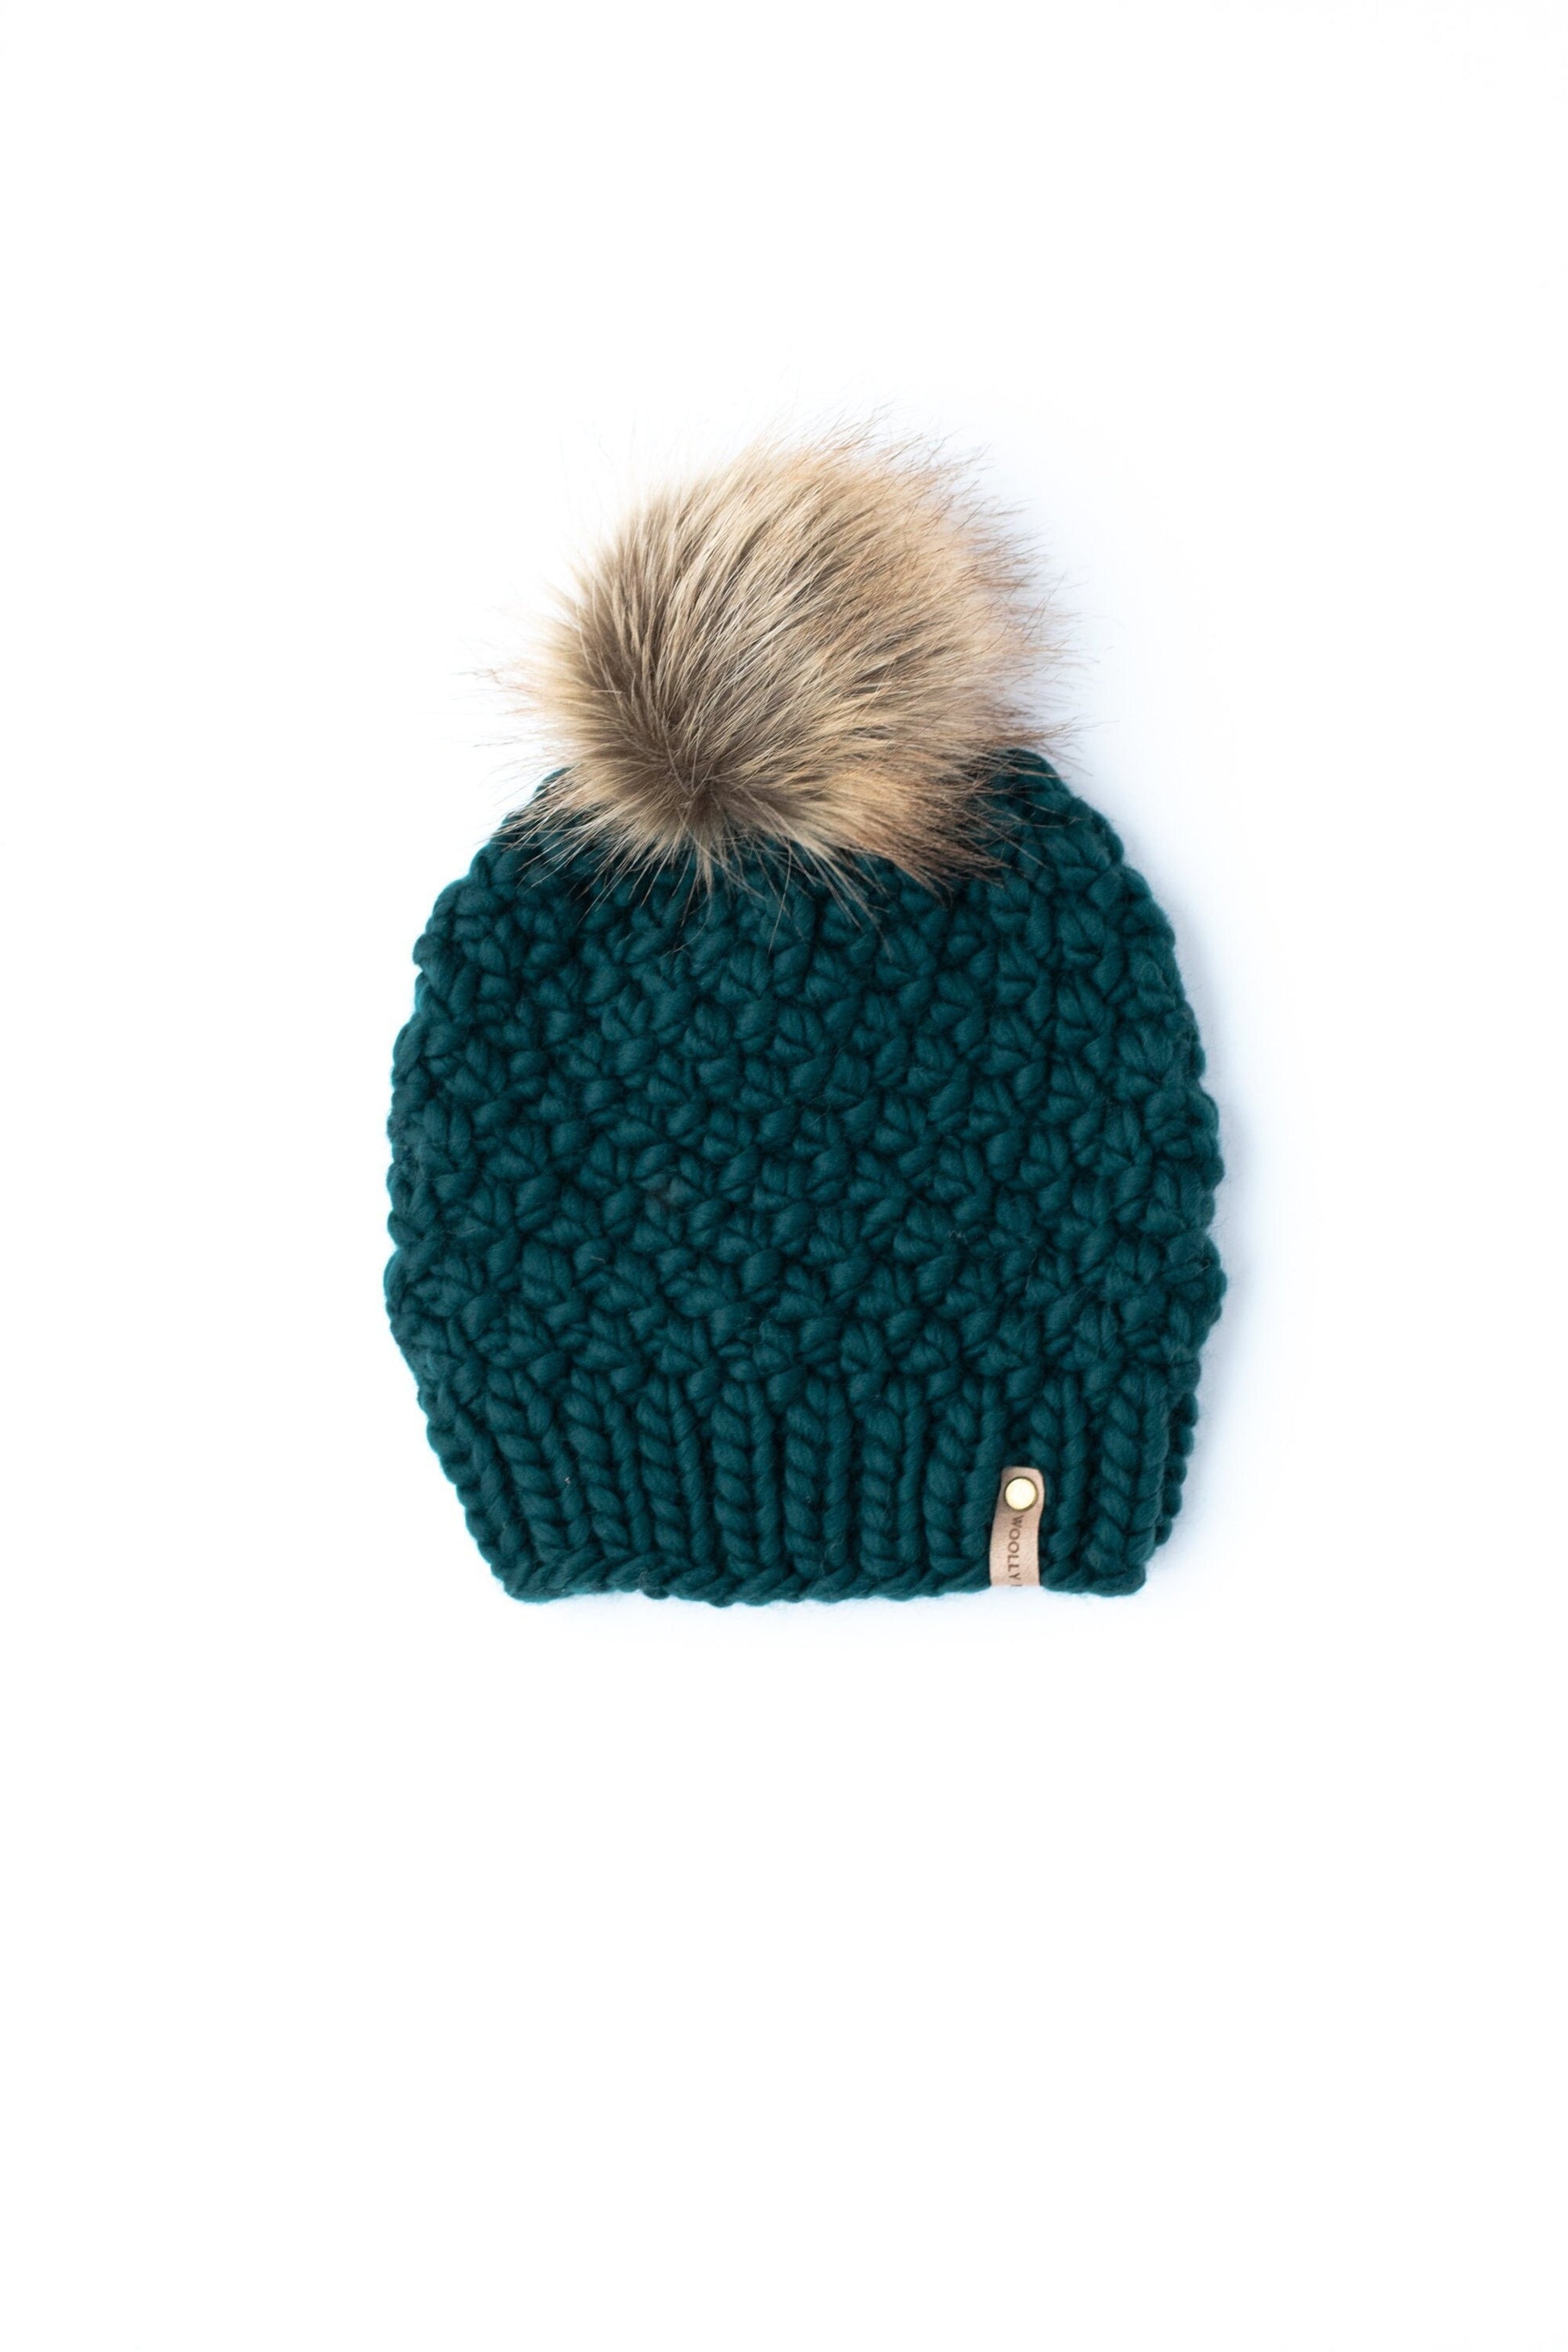 Forest Green Hand Knit Wool Hat with Pom Pom